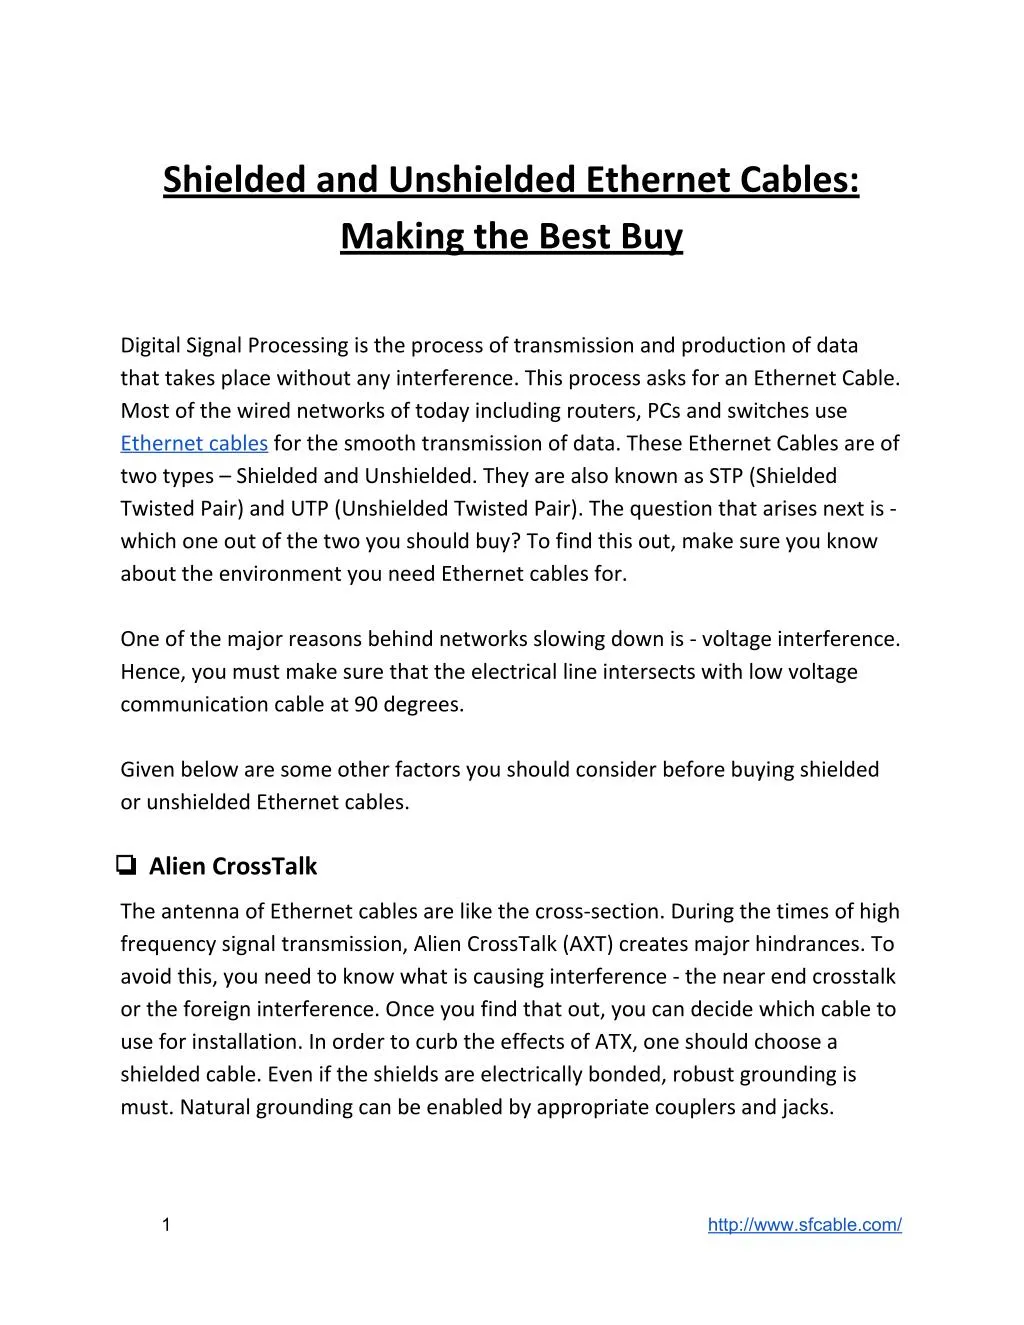 shielded and unshielded ethernet cables making